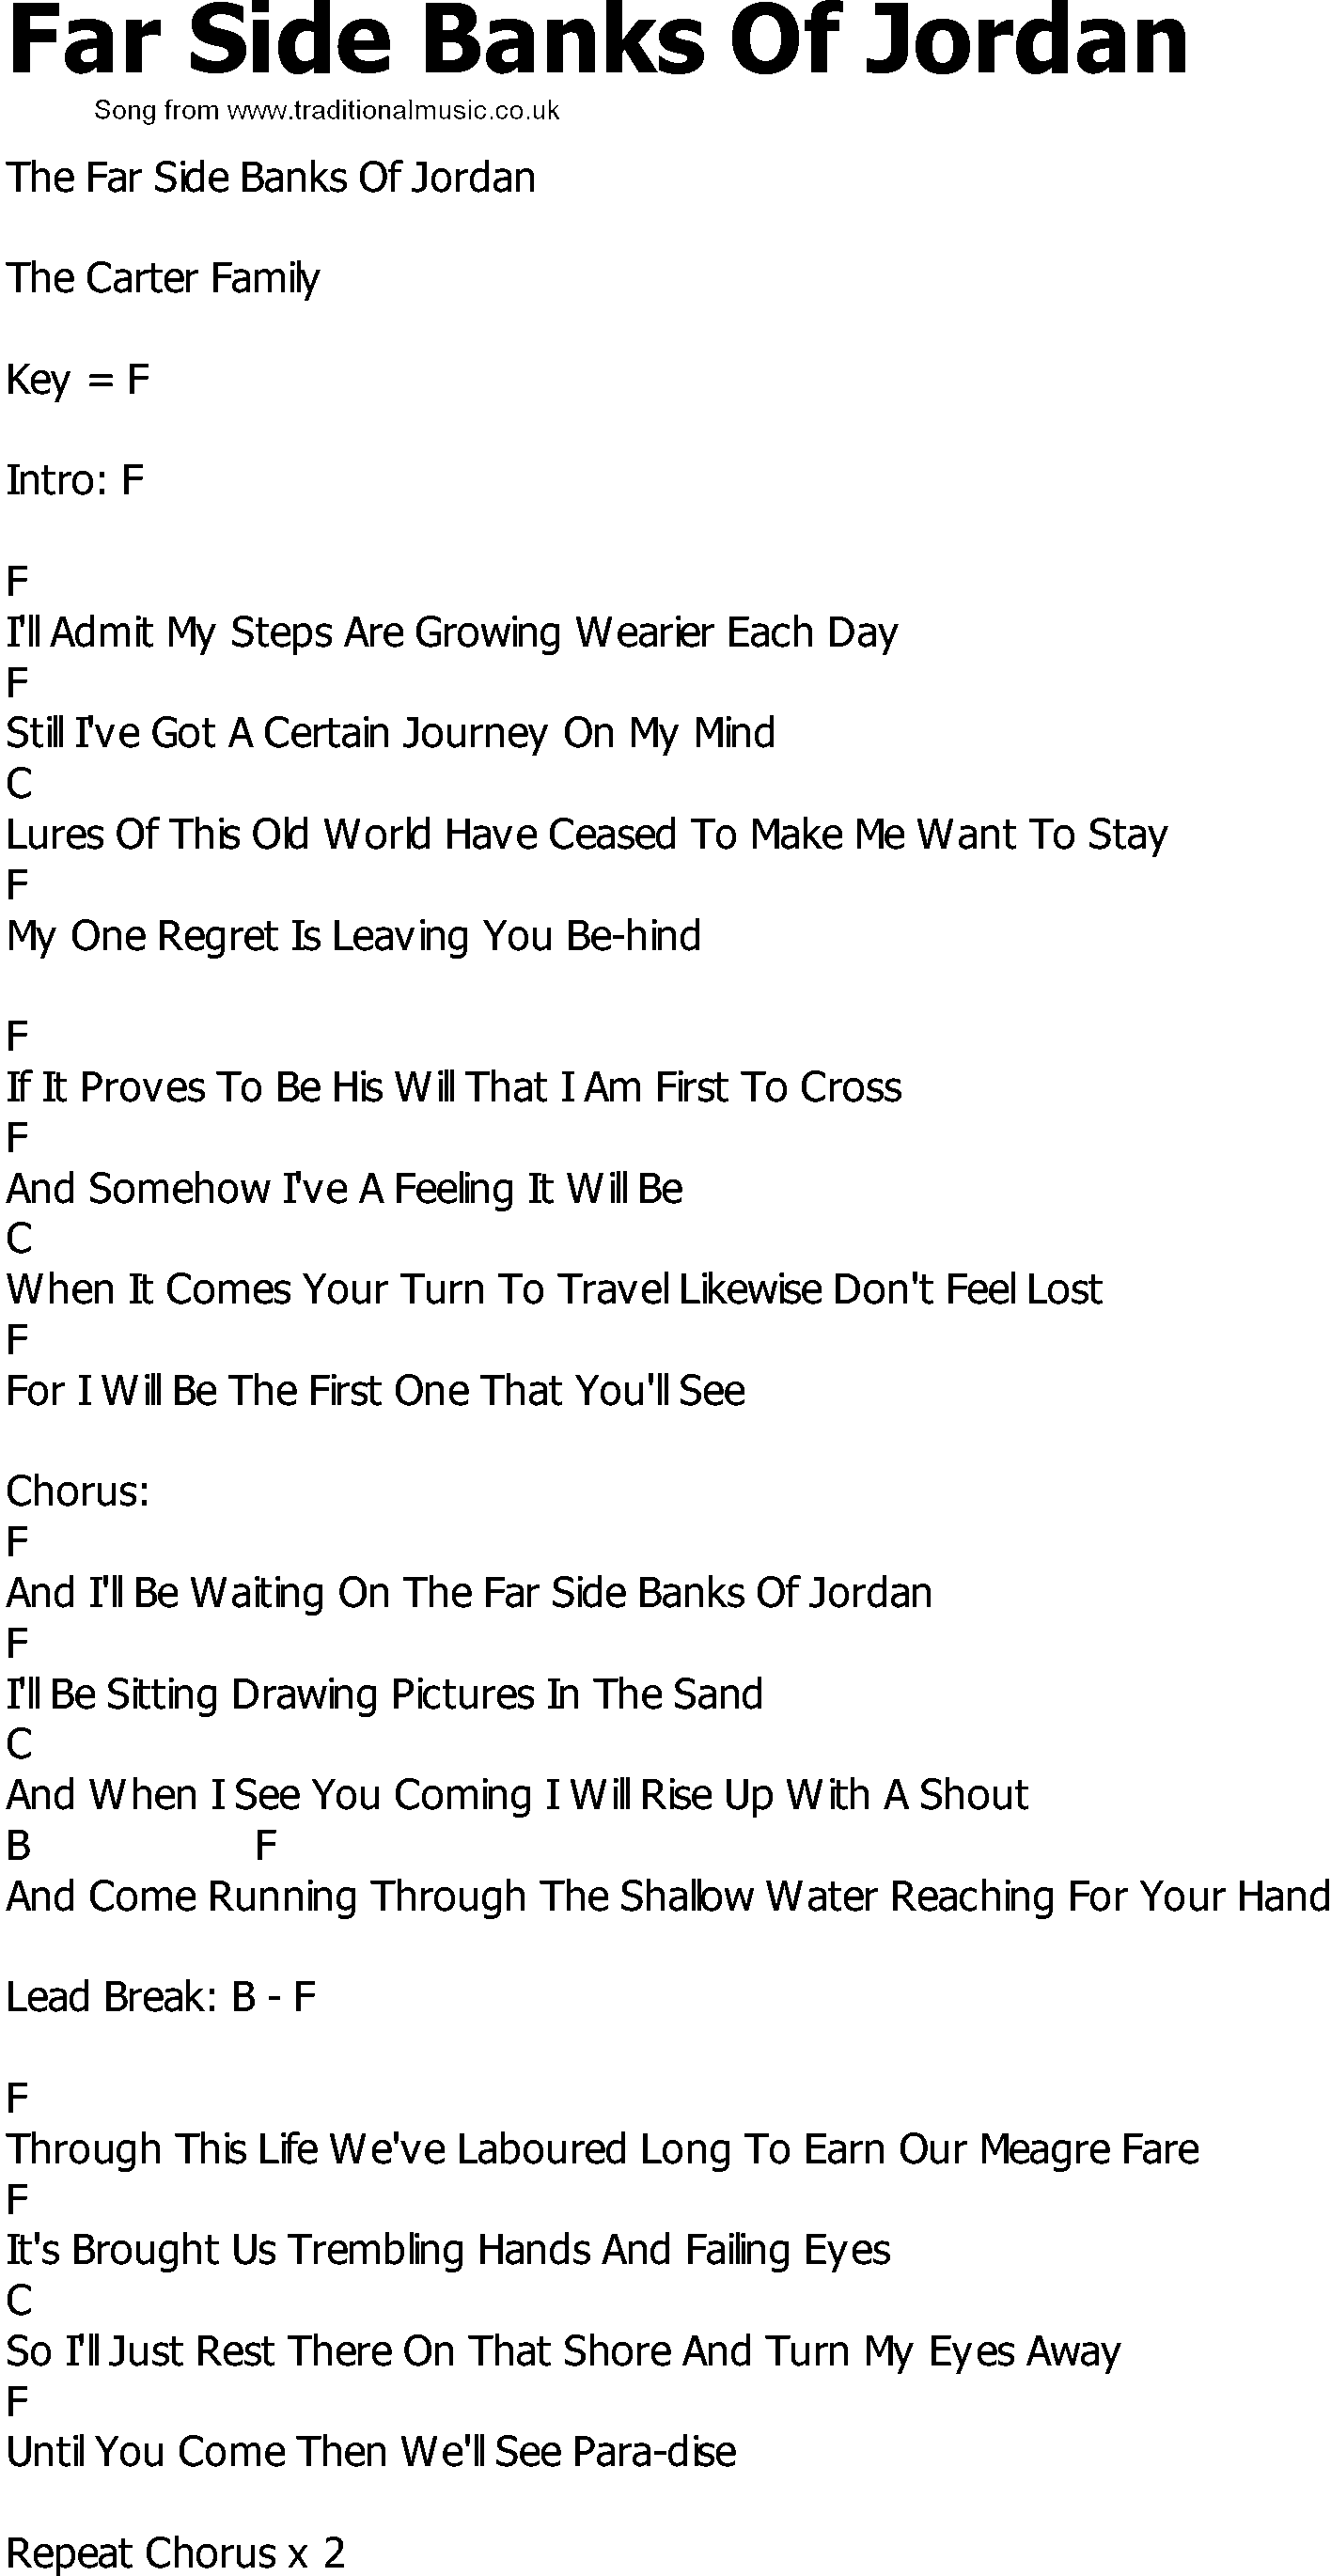 Old Country song lyrics with chords - Far Side Banks Of Jordan